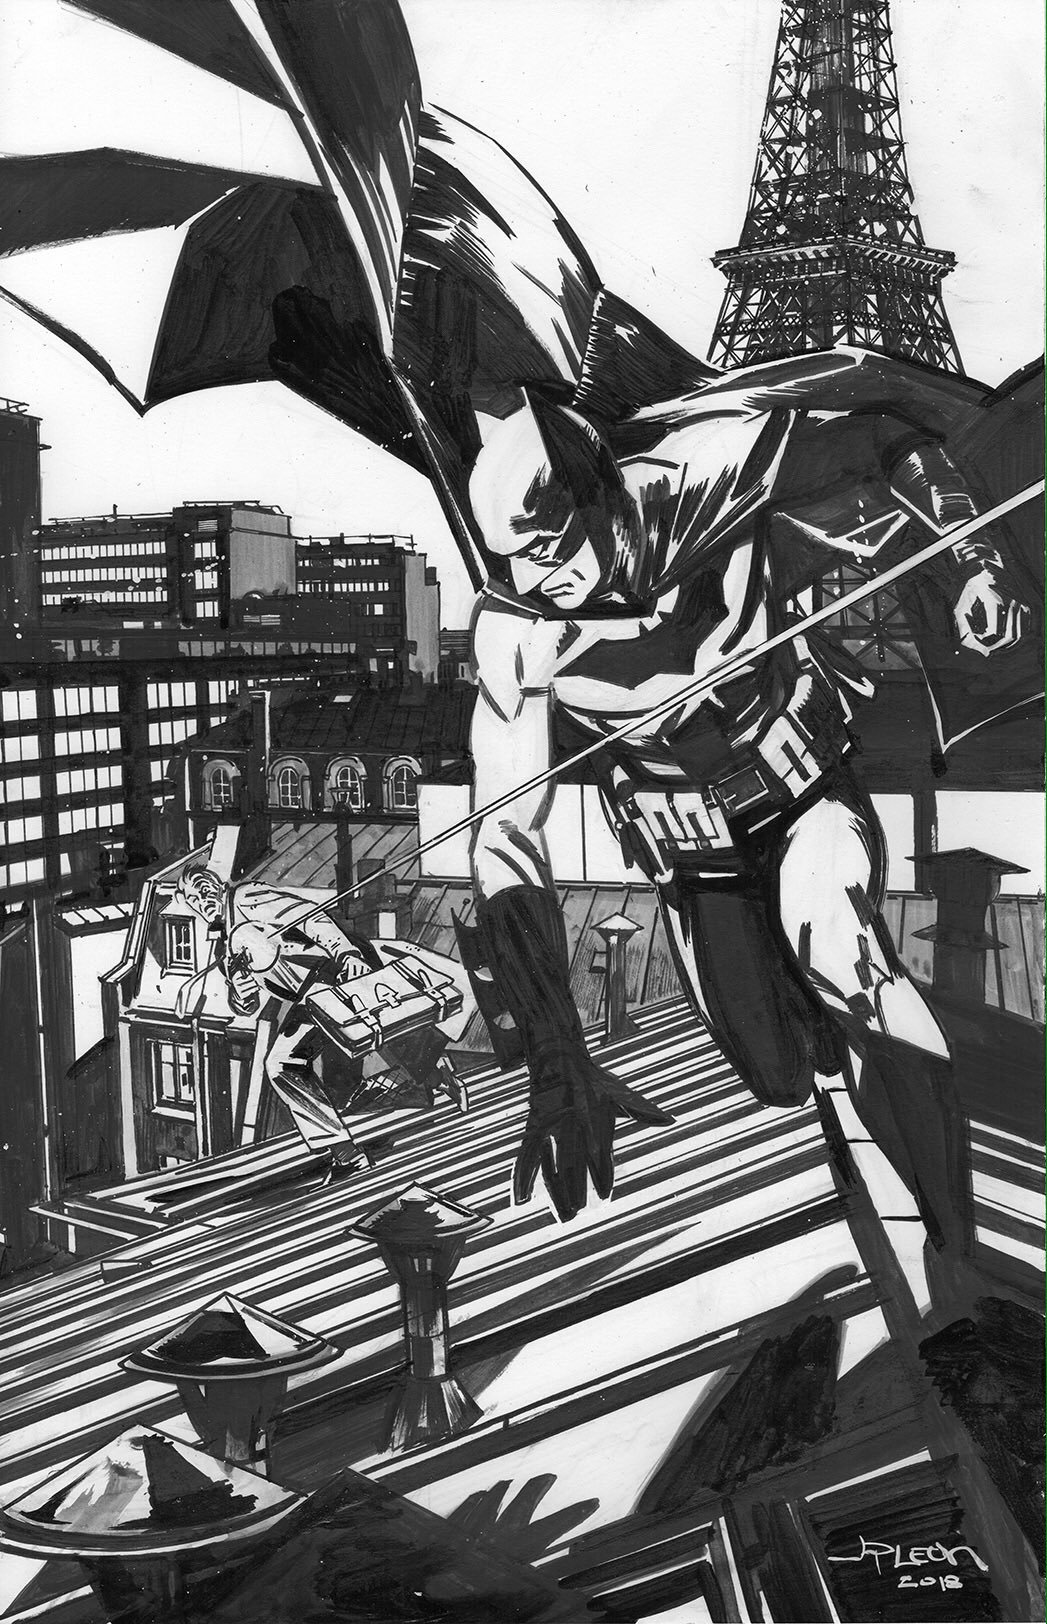 Comics and Other Cool Stuff — Awesome Batman piece by John Paul Leon.